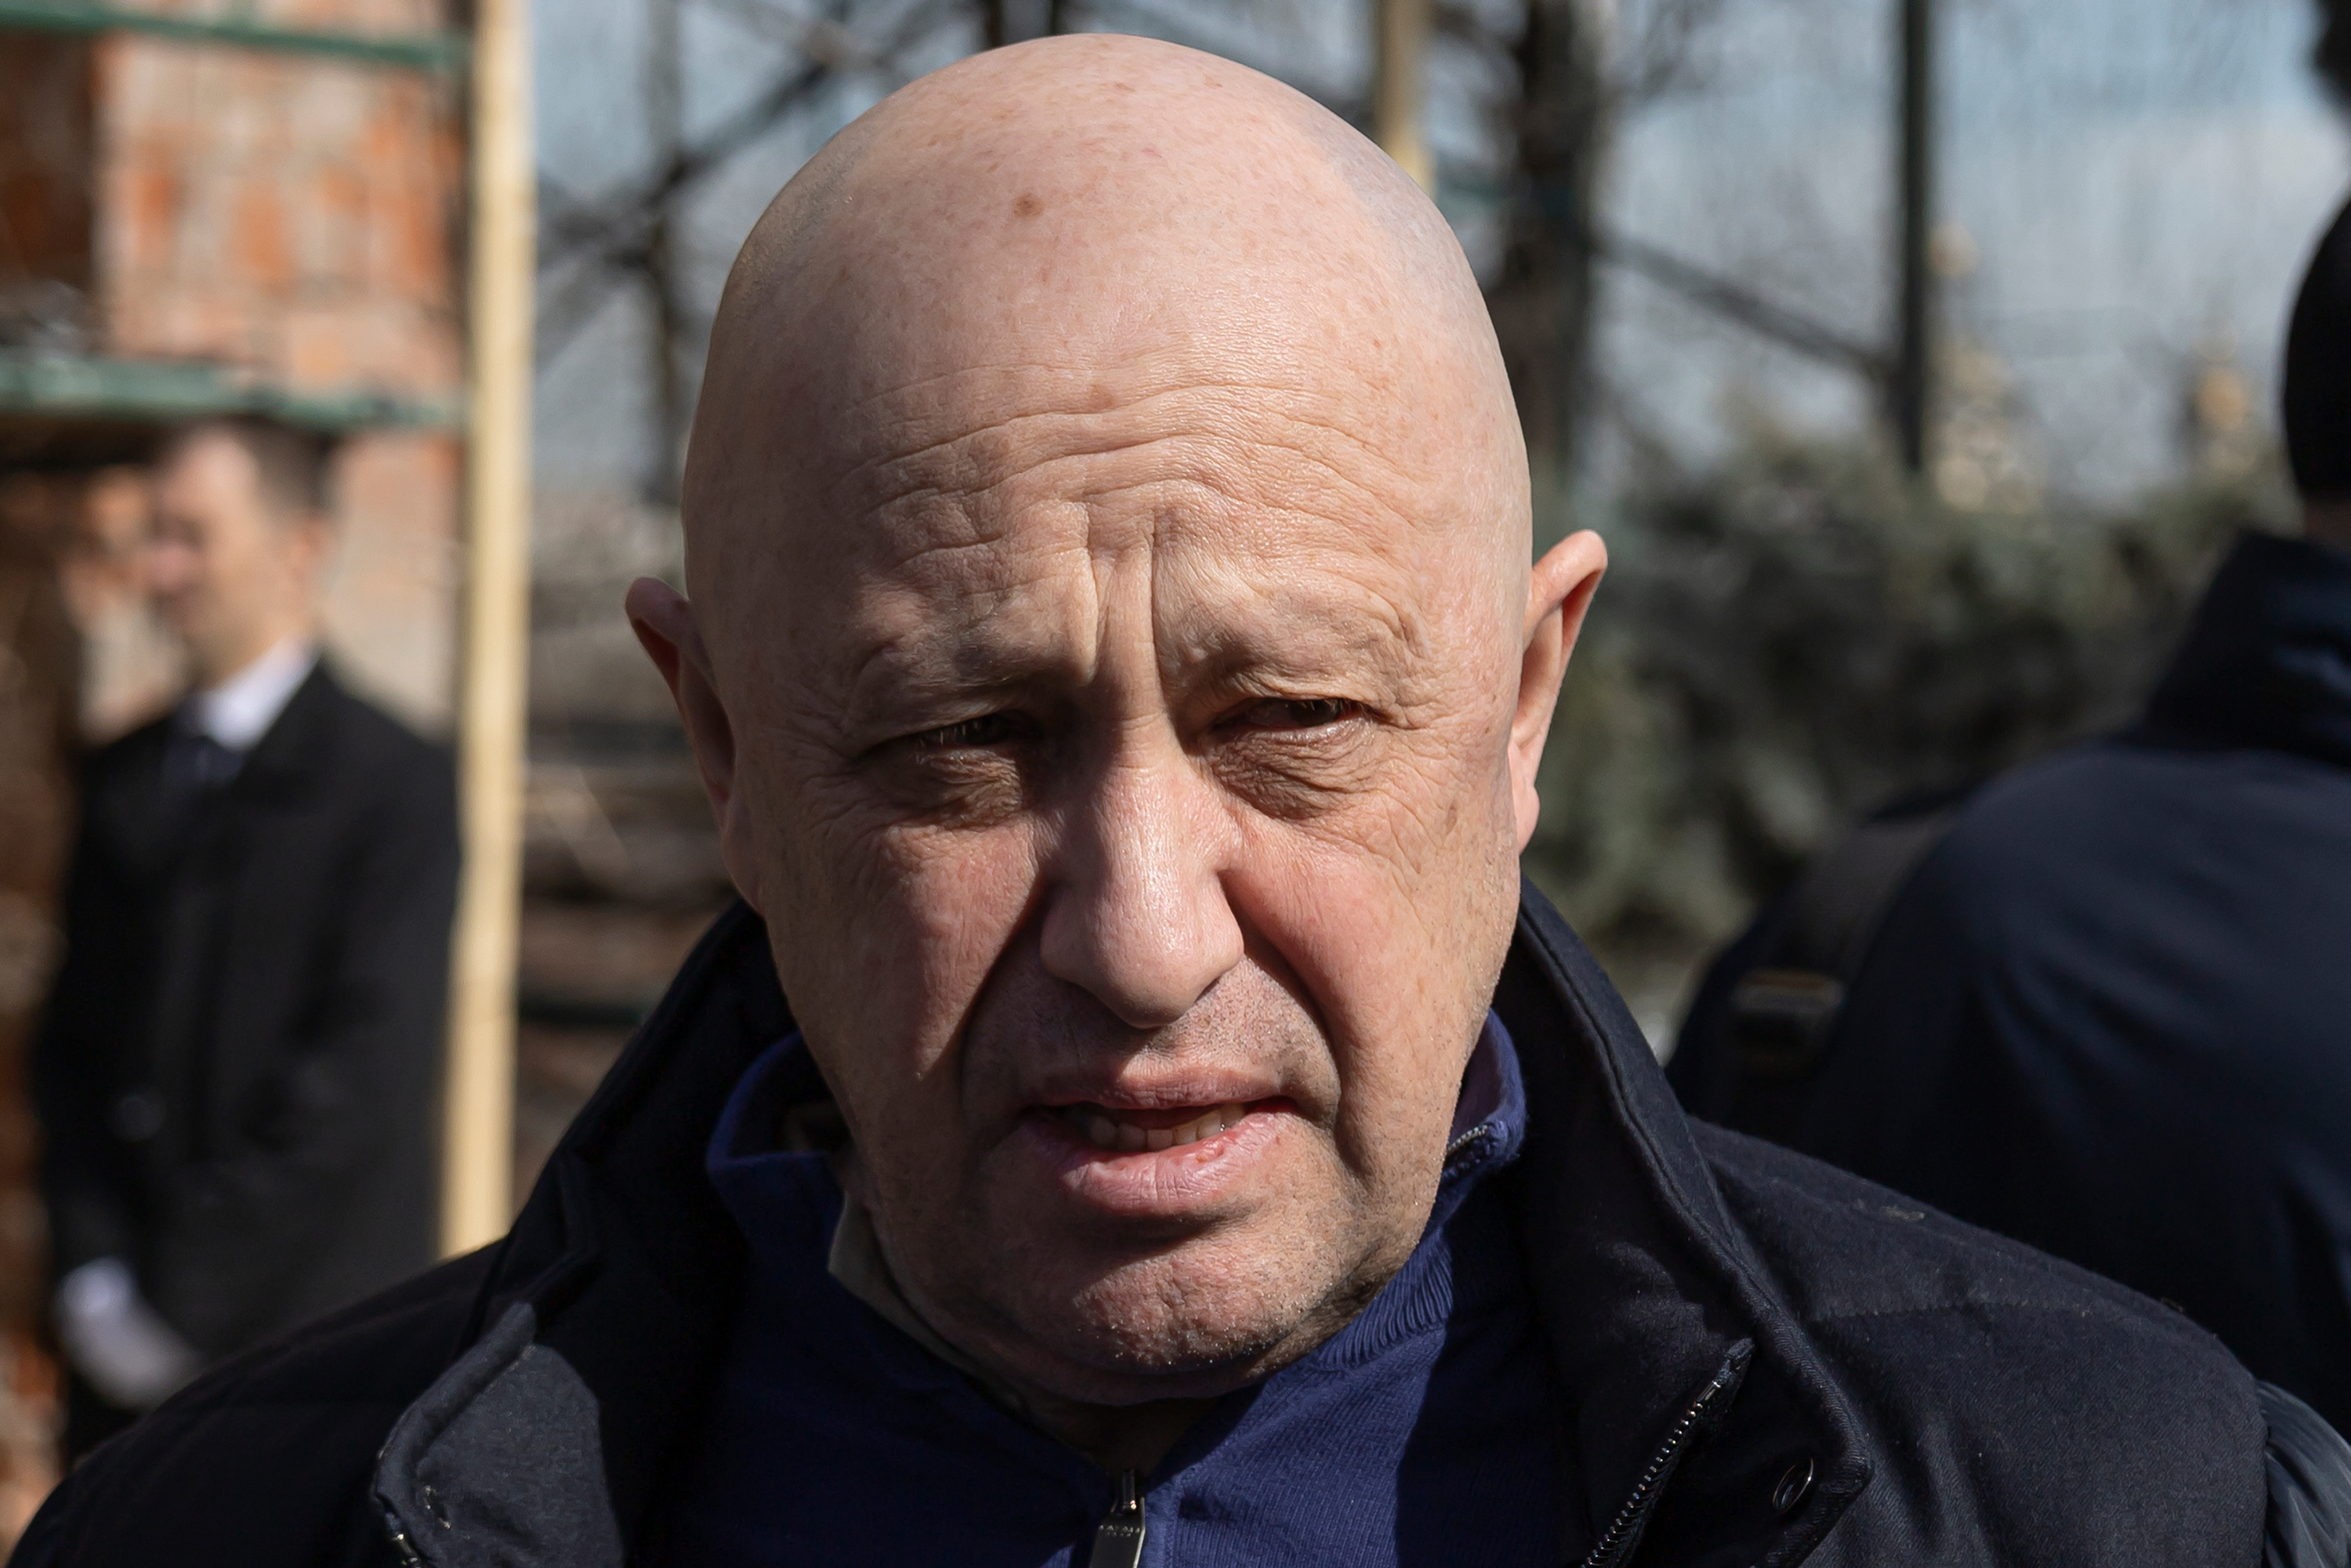 Yevgeny Prigozhin, the owner of the Wagner Group, arrives at a cemetery in Moscow, Russia, on April 8.